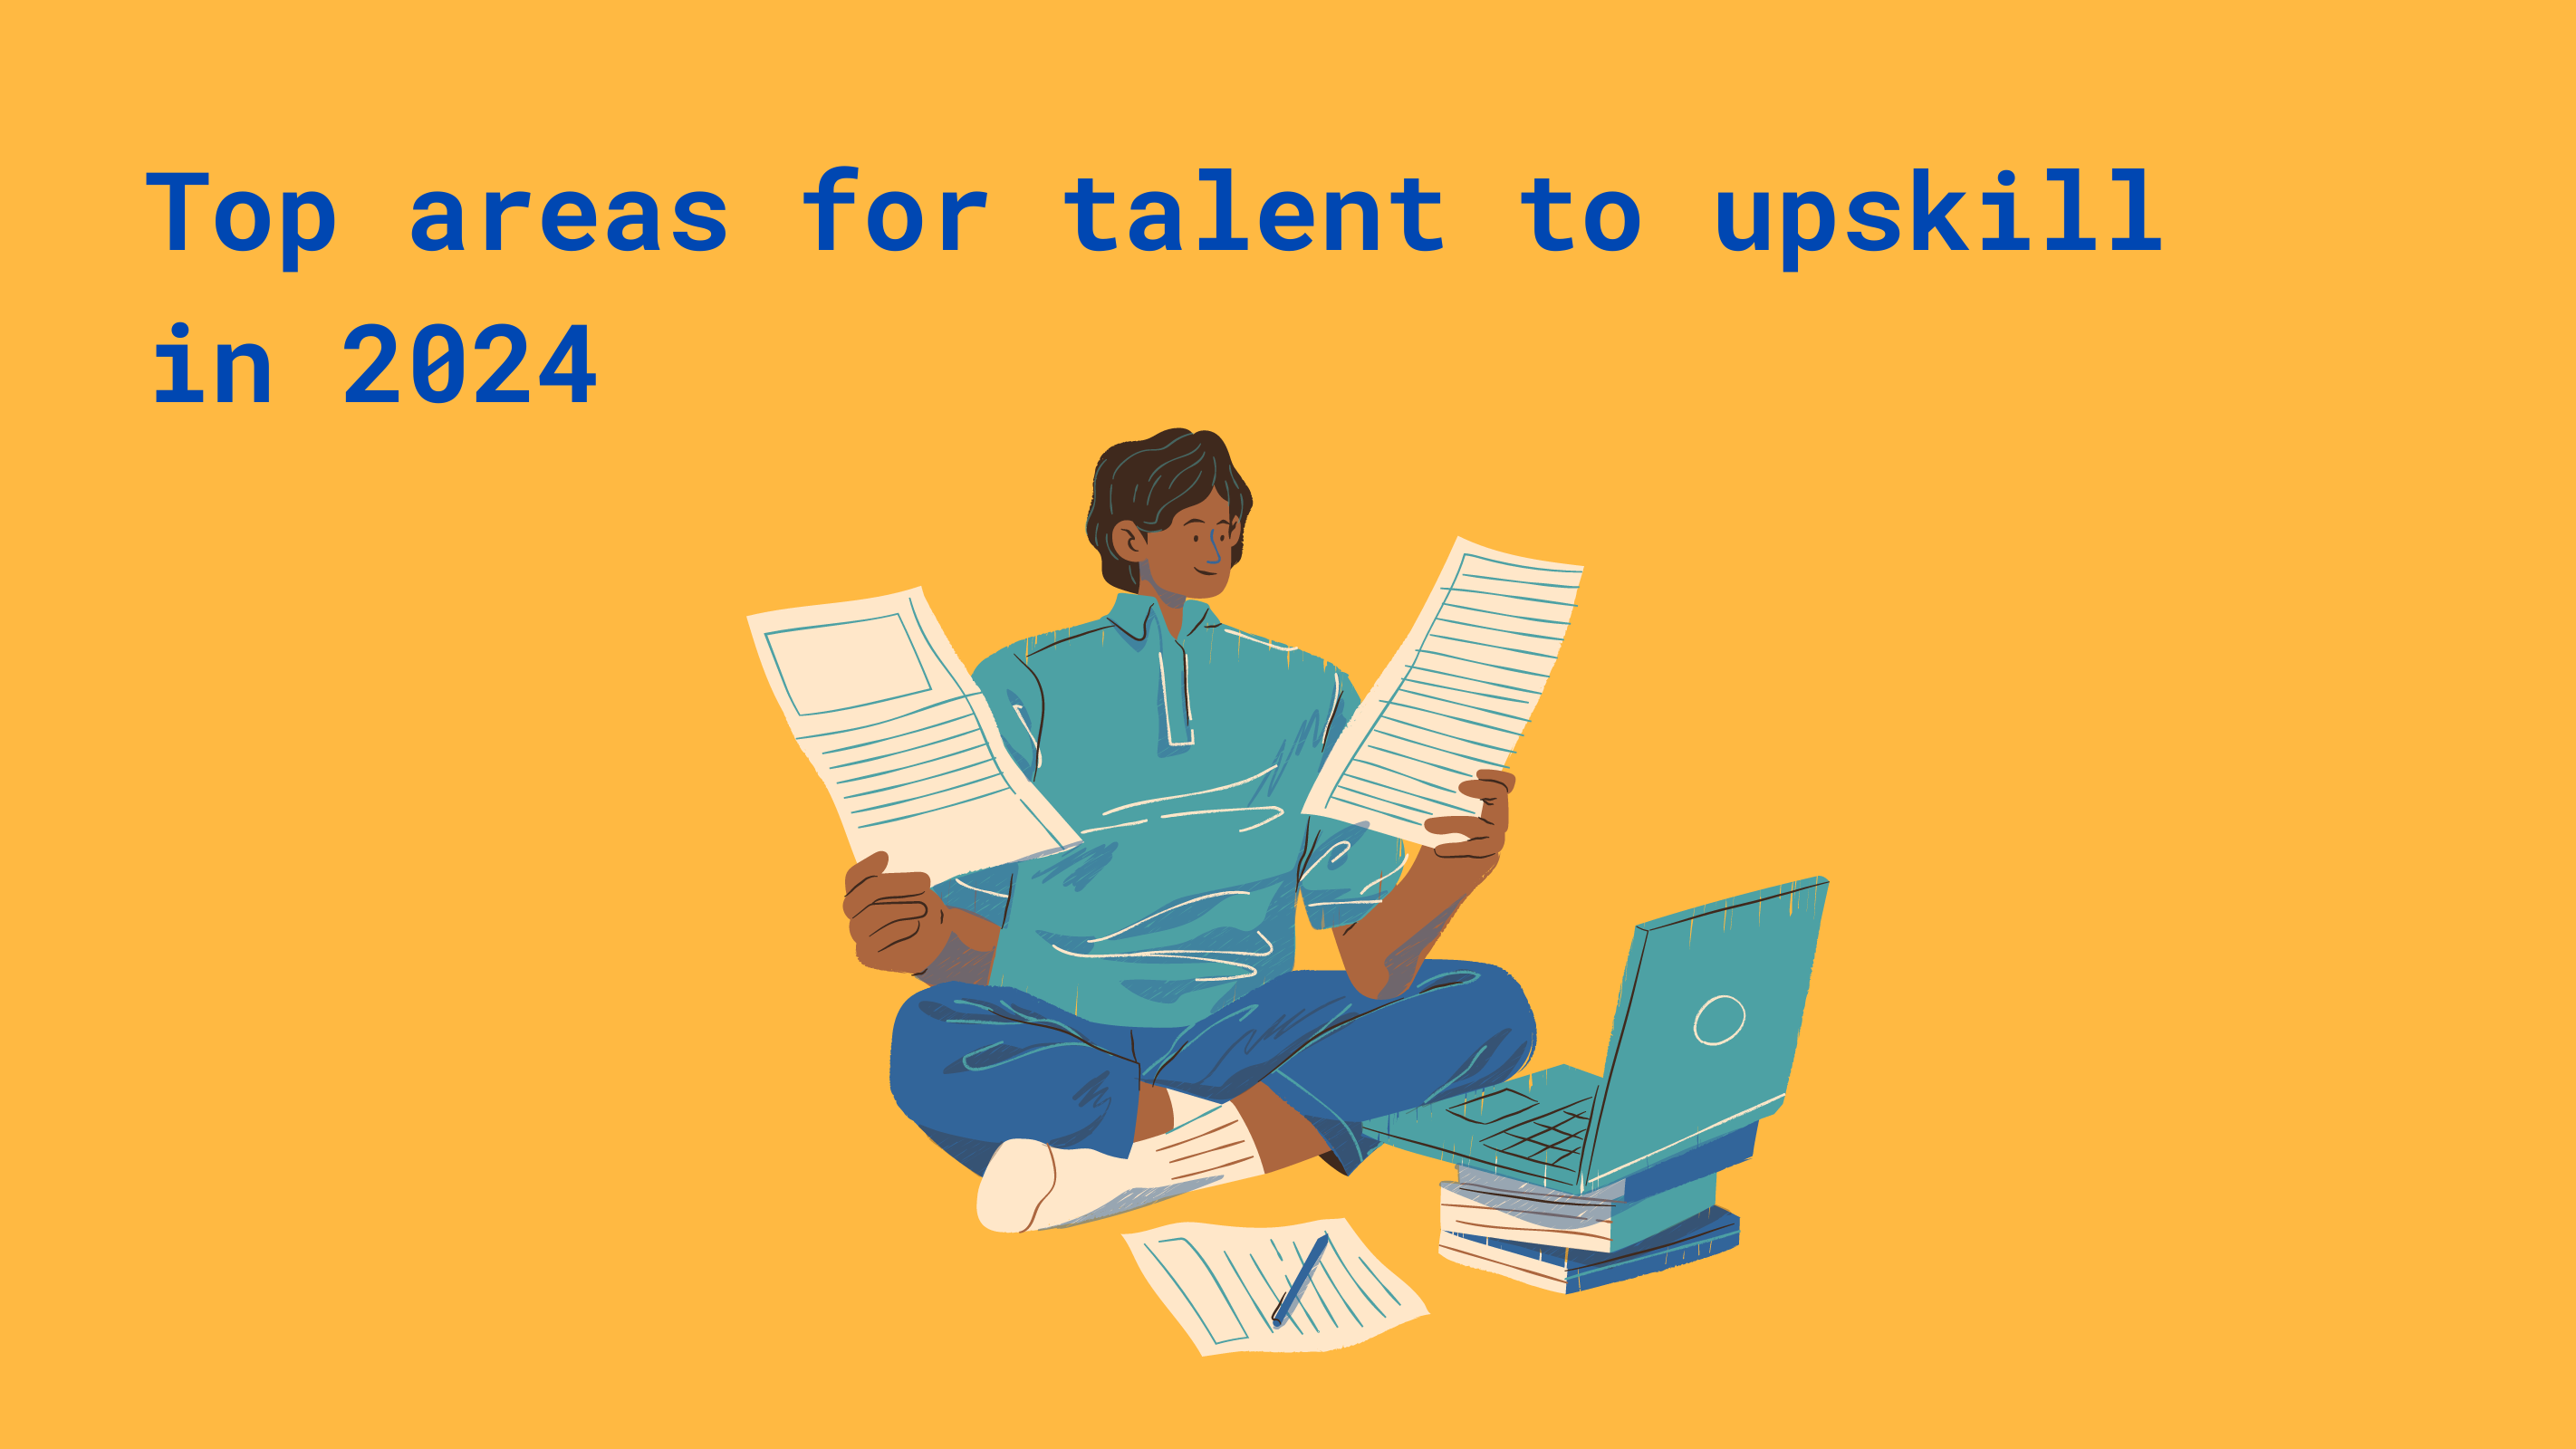 Across the top reads "Top skills for talent to upskill in 2024". Underneath it is a graphic of a person sitting in front of a laptop and looking at different papers in their hands.